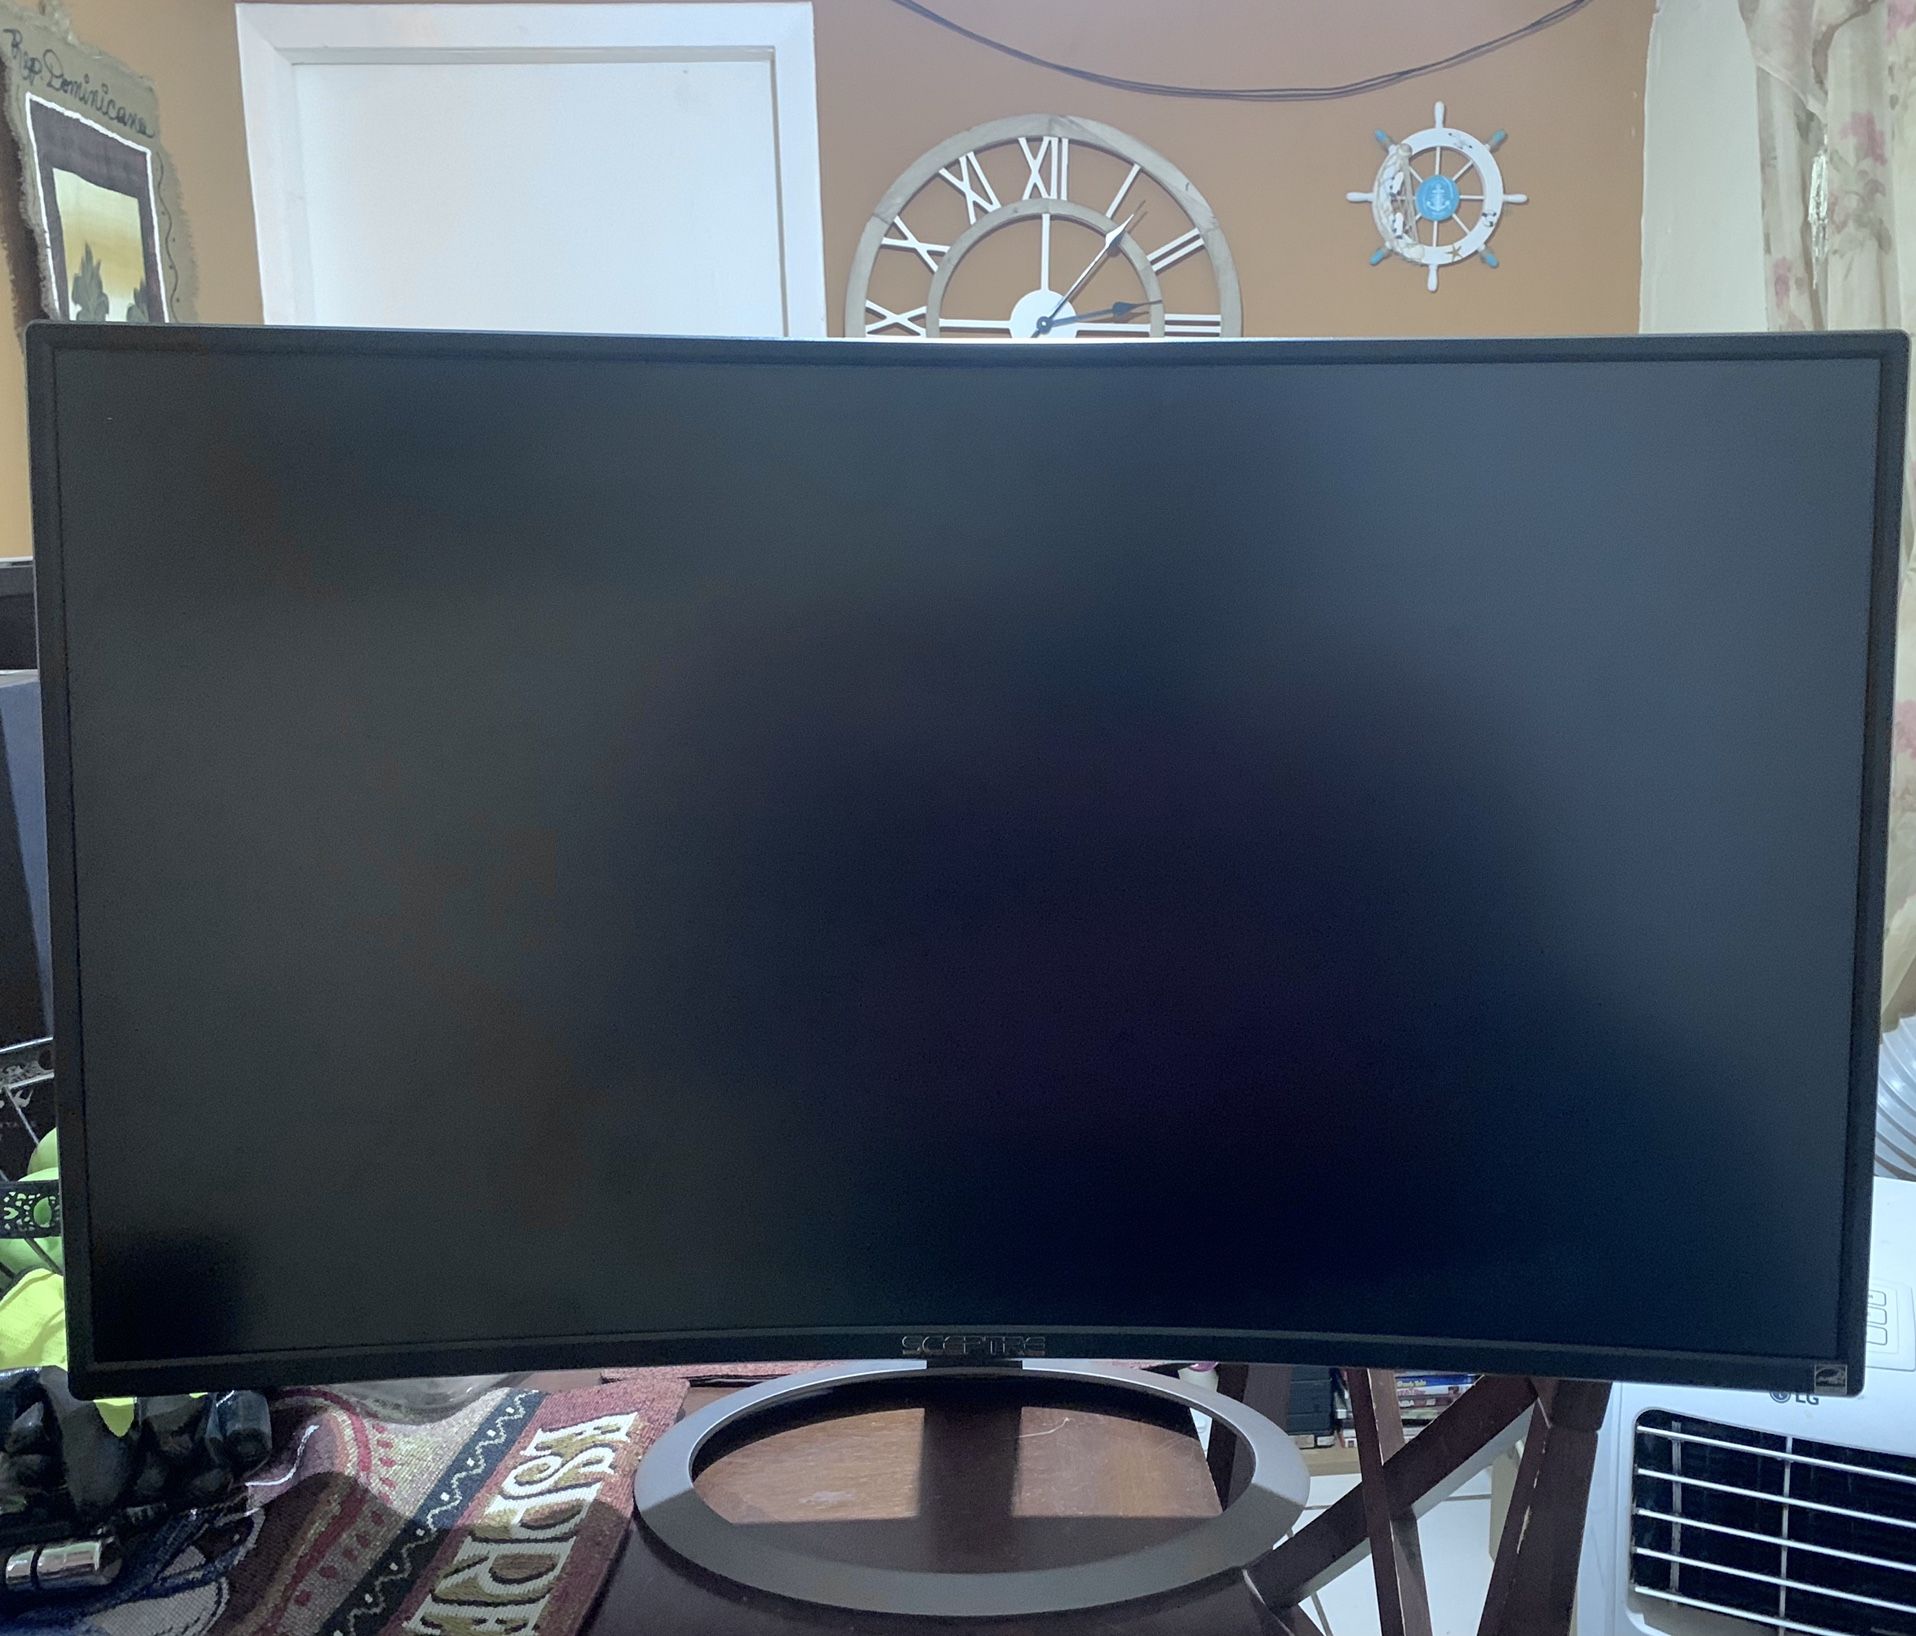 32” Sceptre Curved Monitor (Works) - FHD